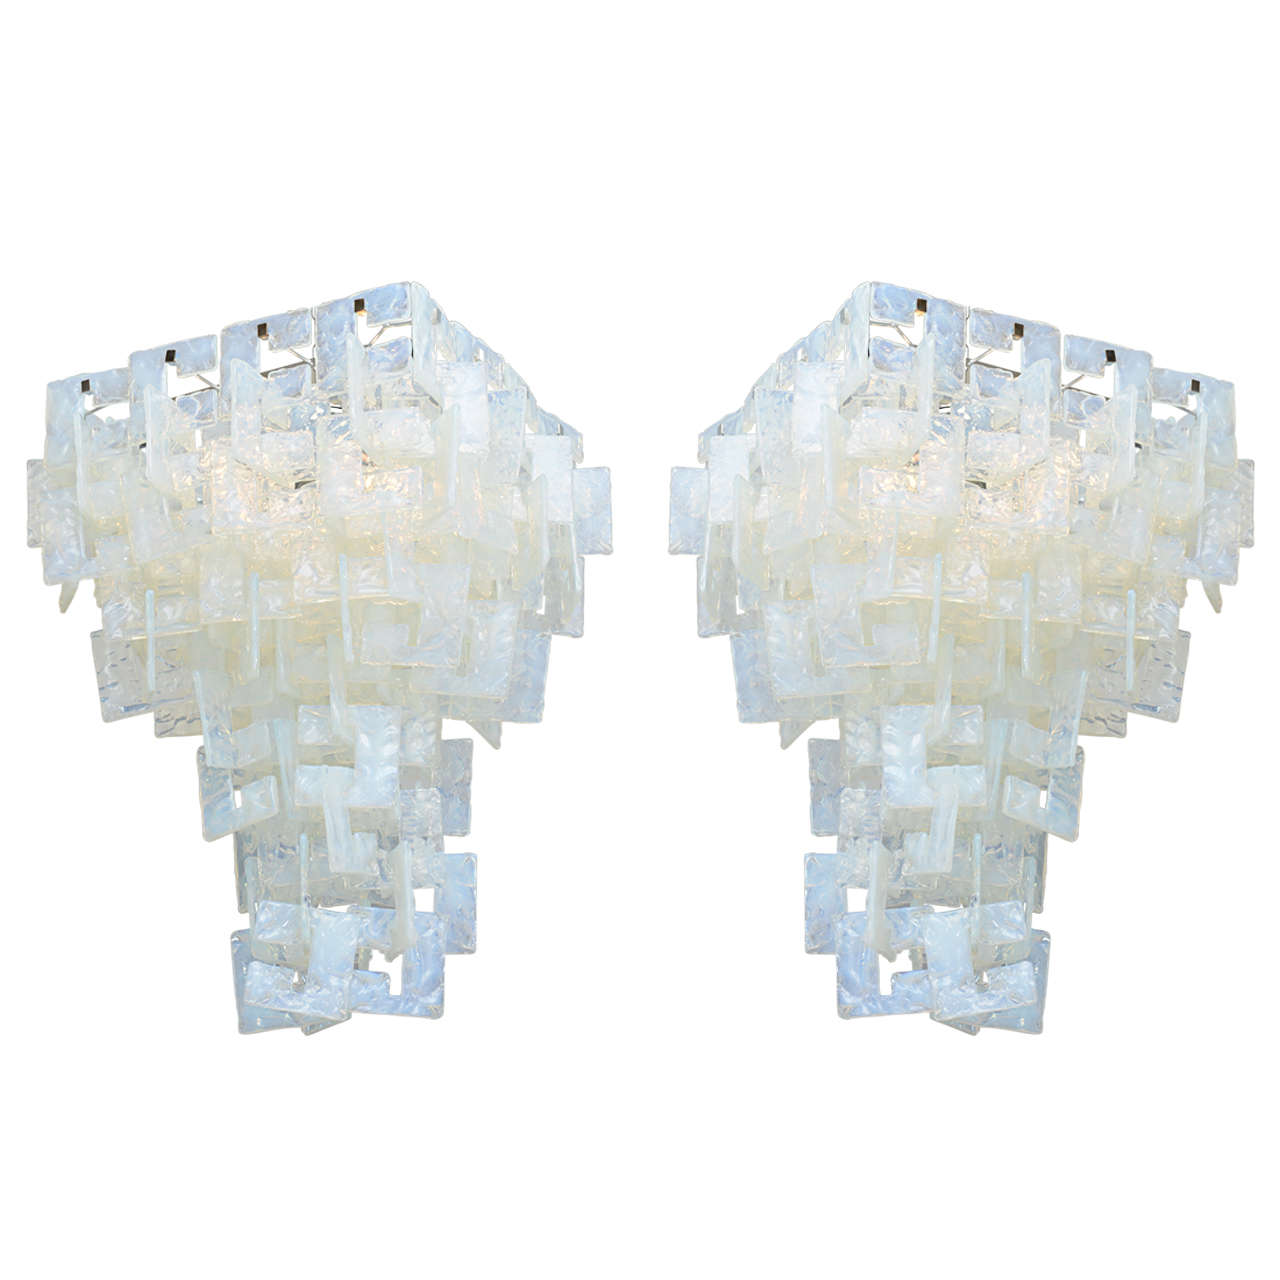 Pair of Italian Modern Opalescent Glass Chandeliers, Mazzega For Sale